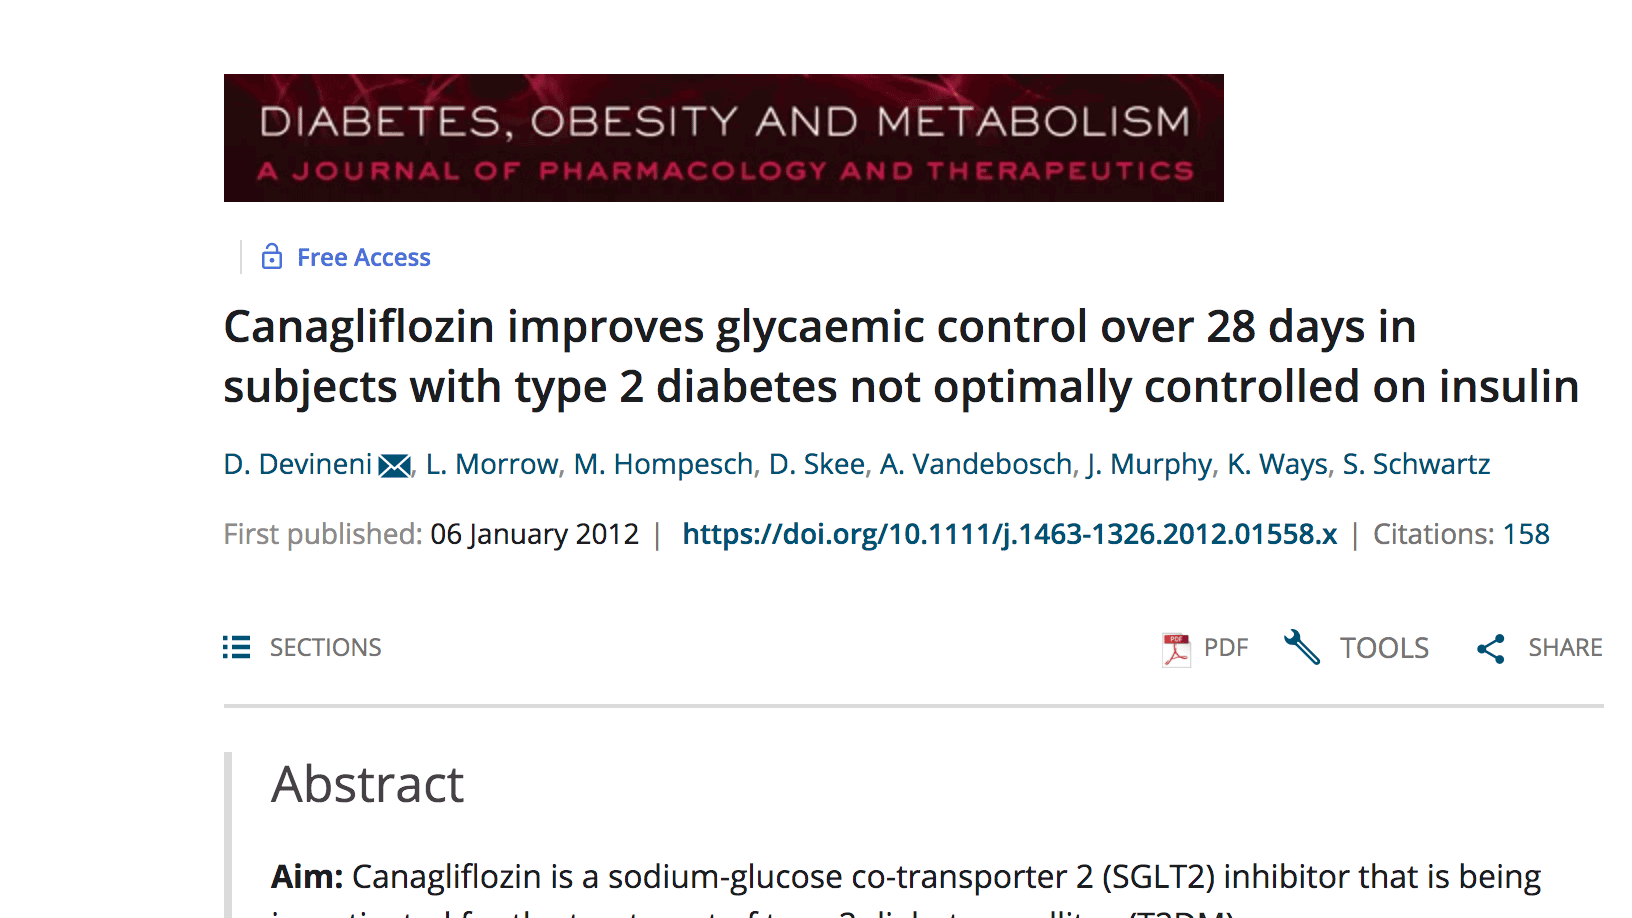 Canagliflozin improves glycaemic control over 28 days in subjects with type 2 diabetes not optimally controlled on insulin. thumbnail